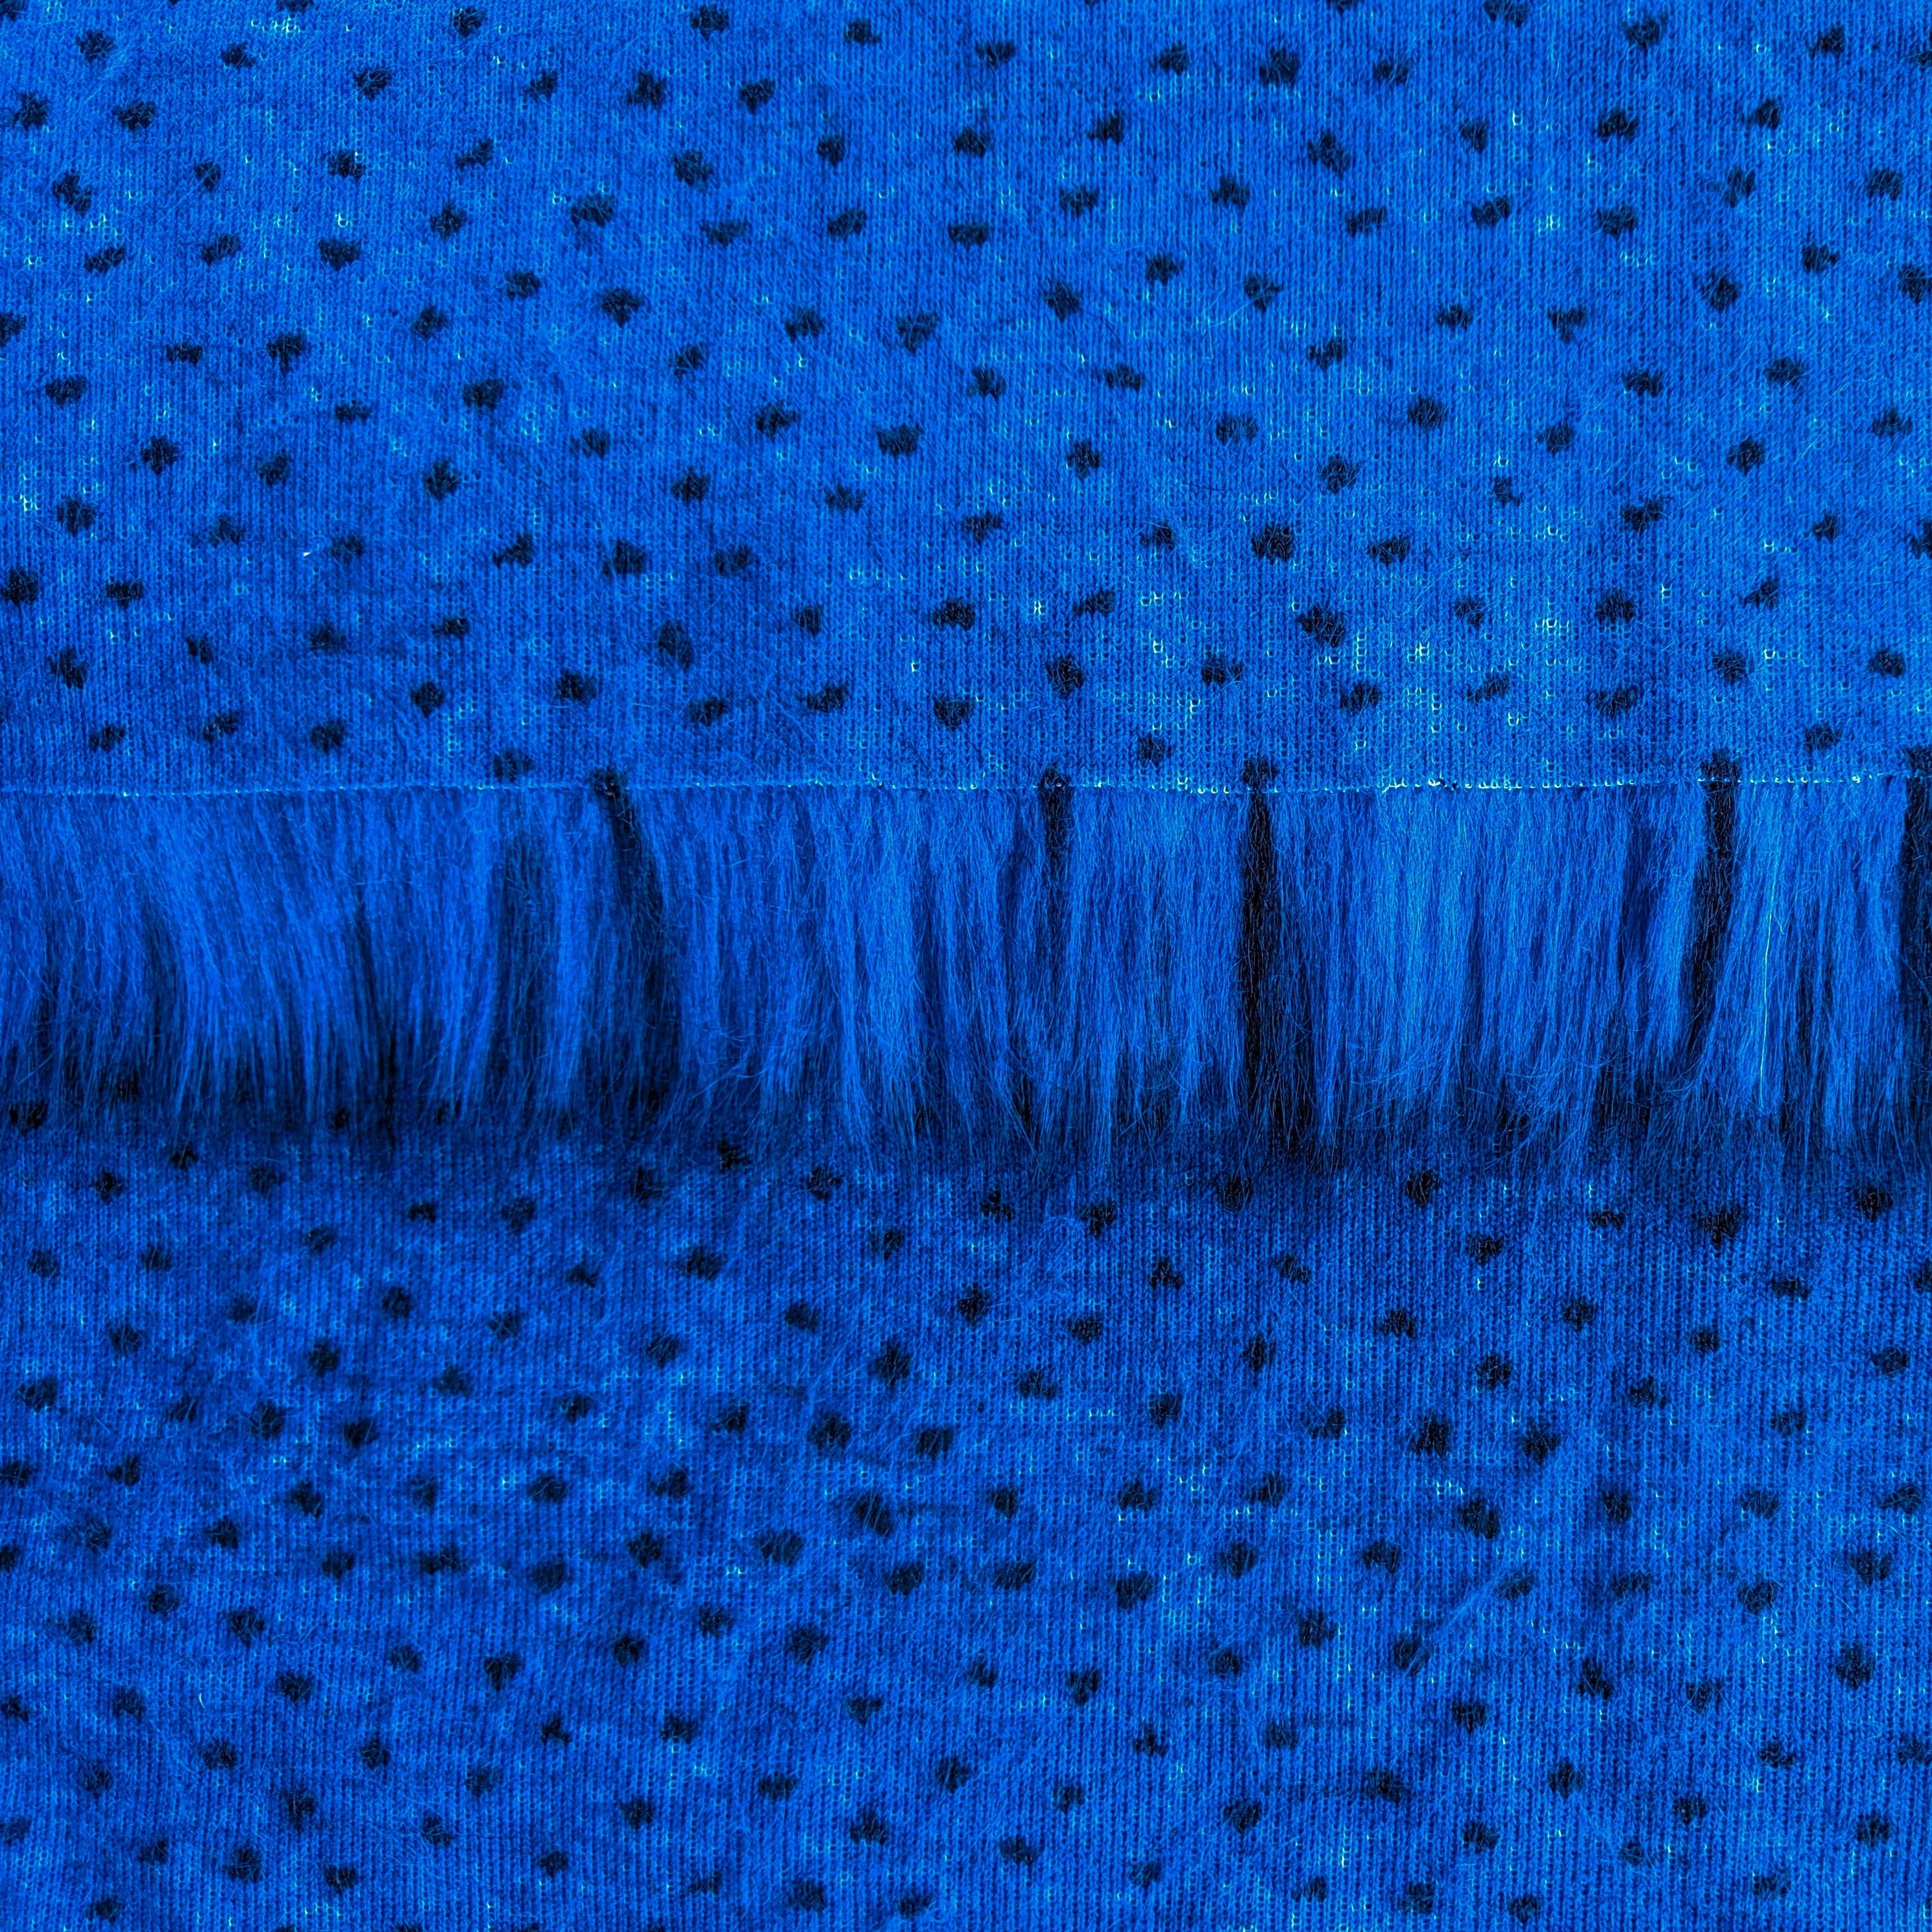 Backing of cobalt blue faux fur fabric showing the long pile length of the fake fur.